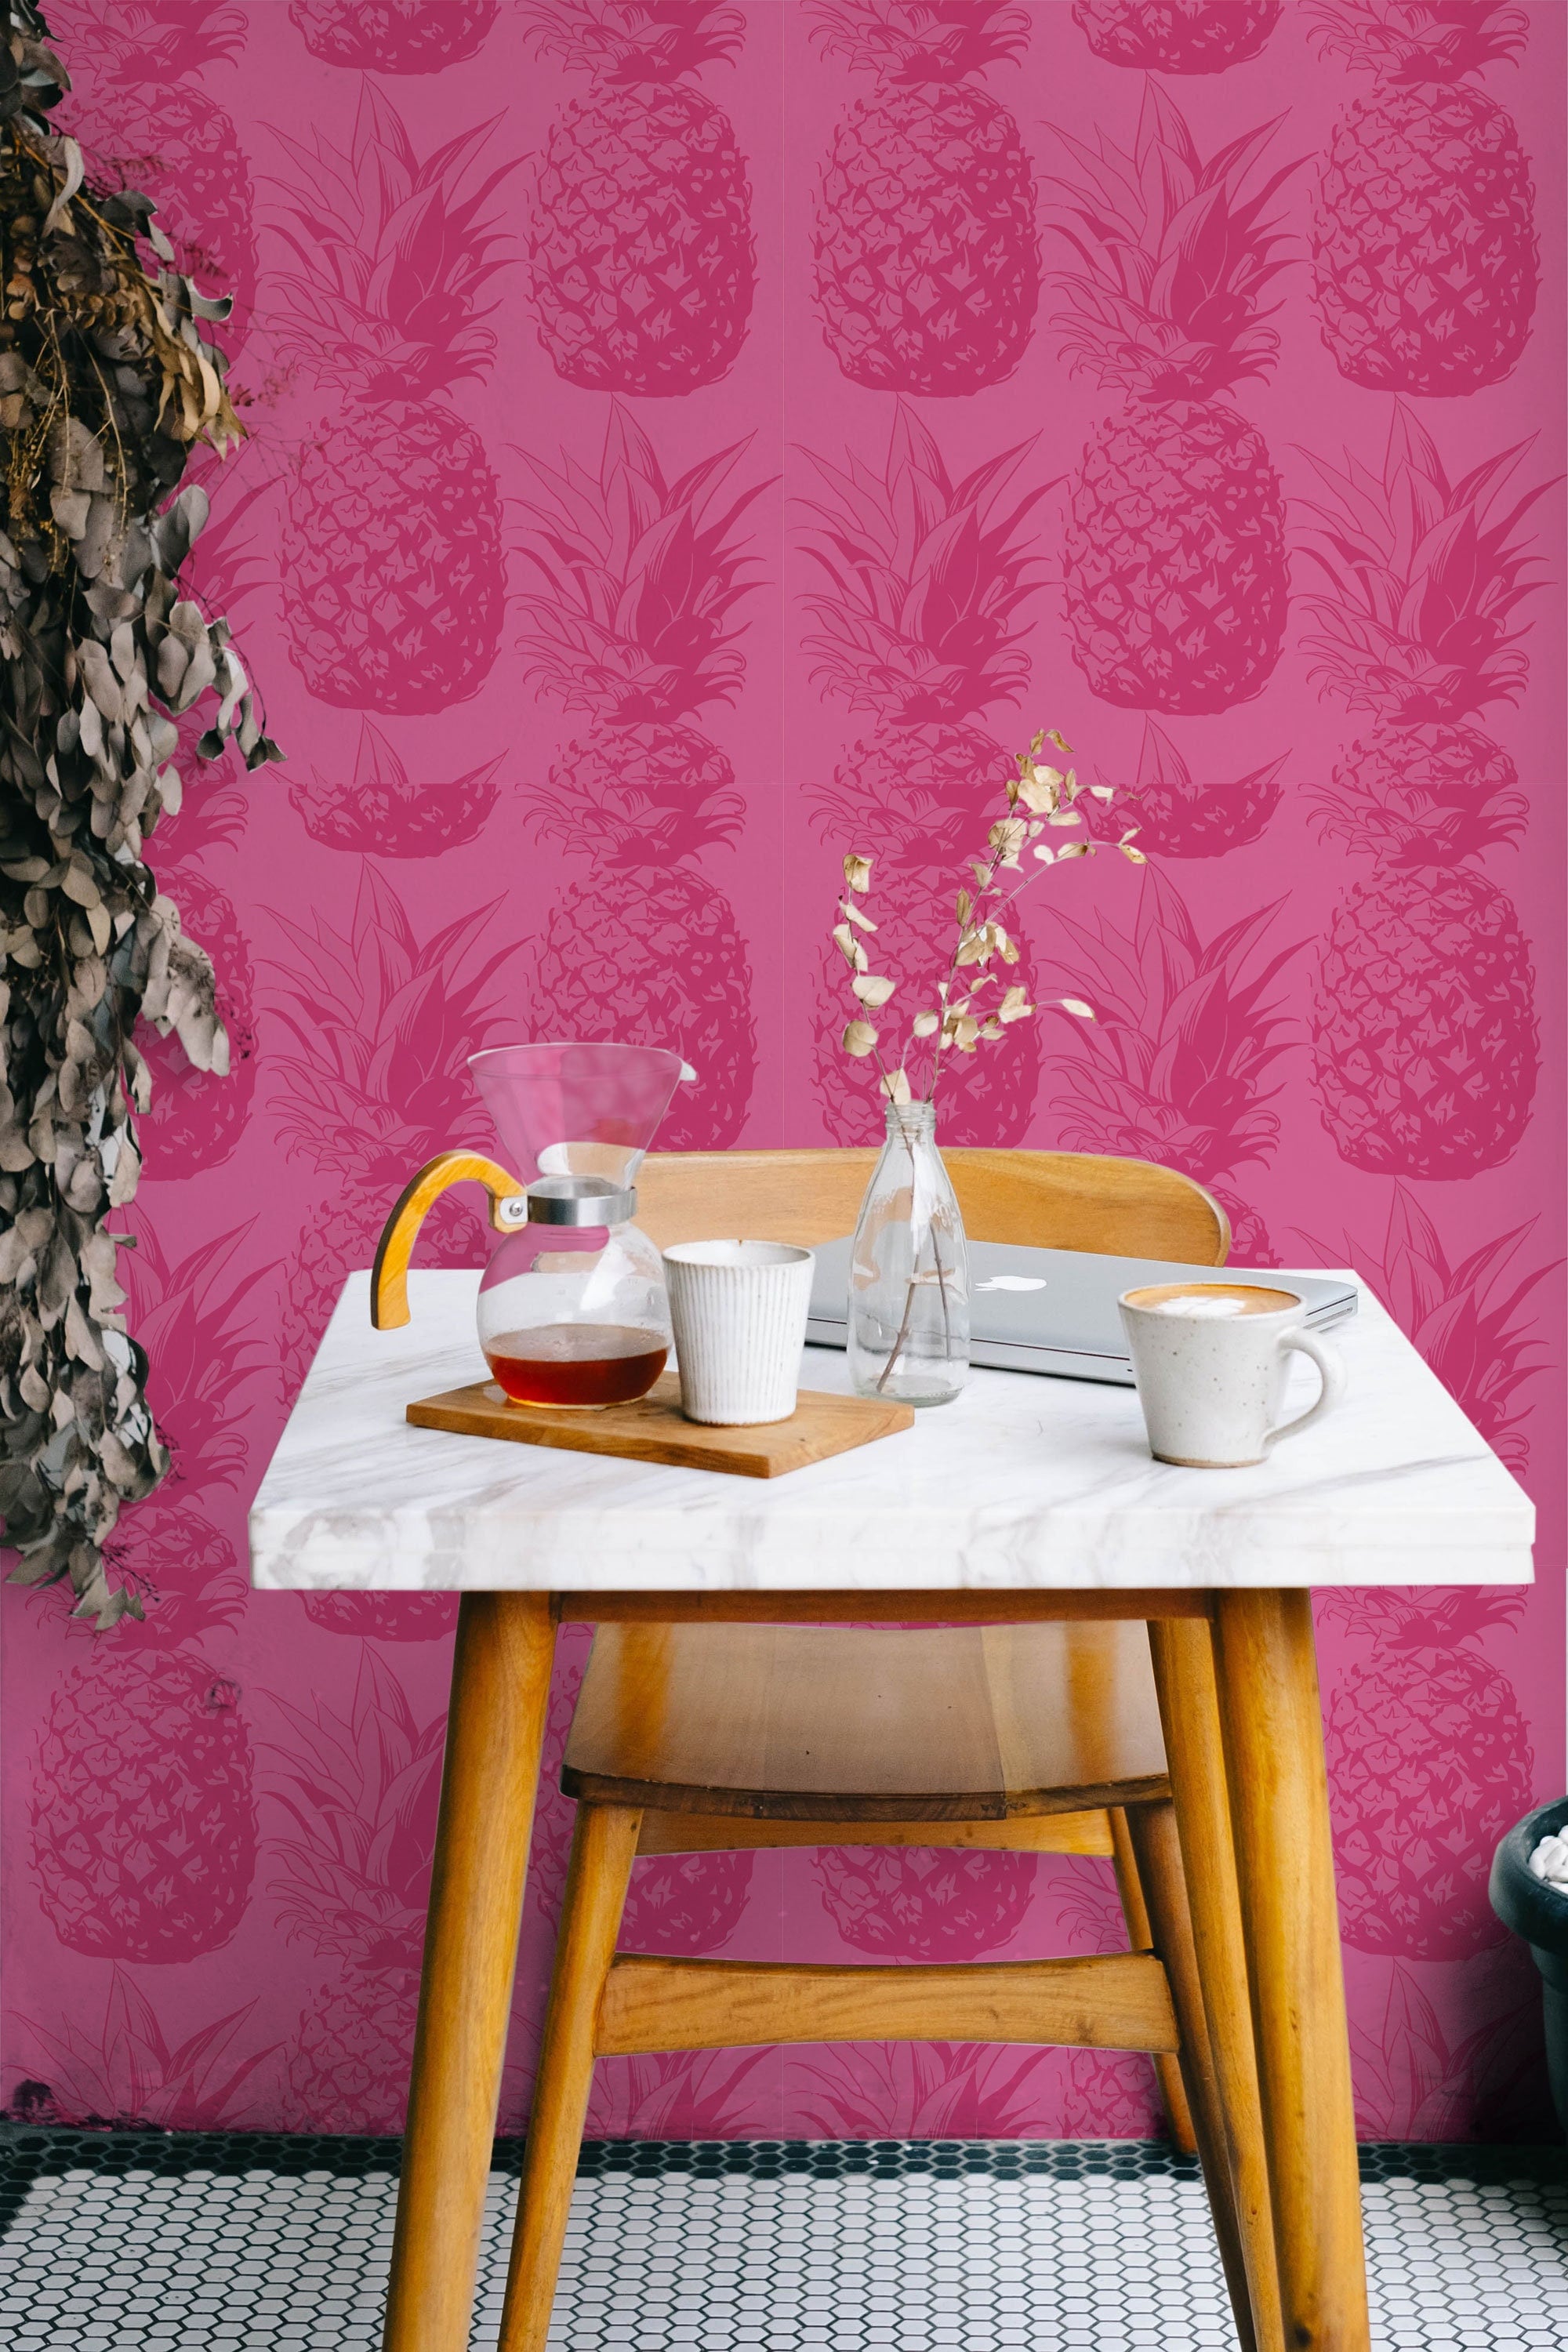 Hot Pink Pineapple Removable Wallpaper Tropical Fruits - Etsy Denmark